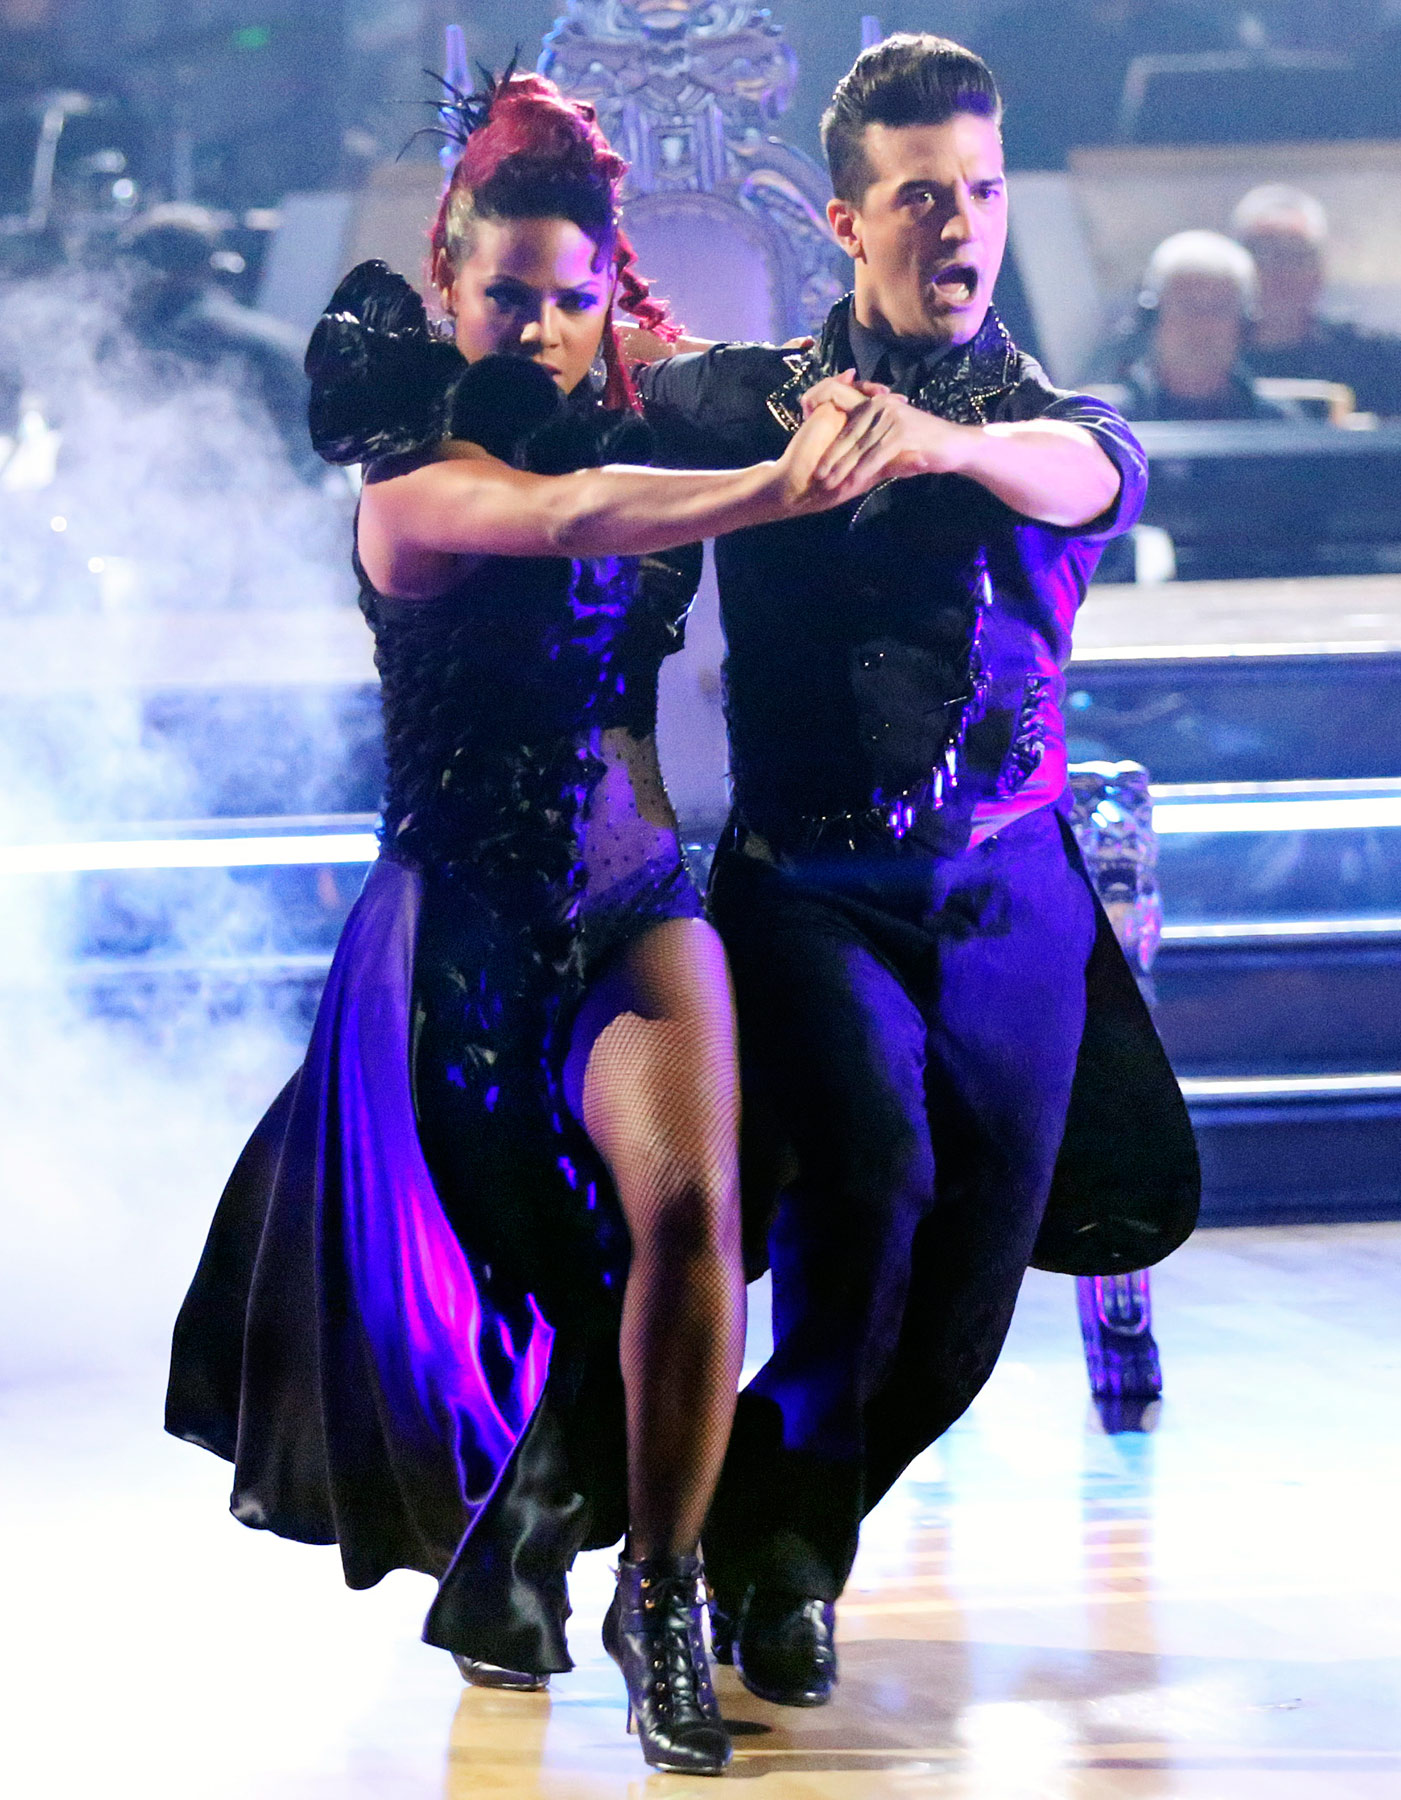 Christina Milian Eliminated on Dancing With the Stars: "I Was Shocked"